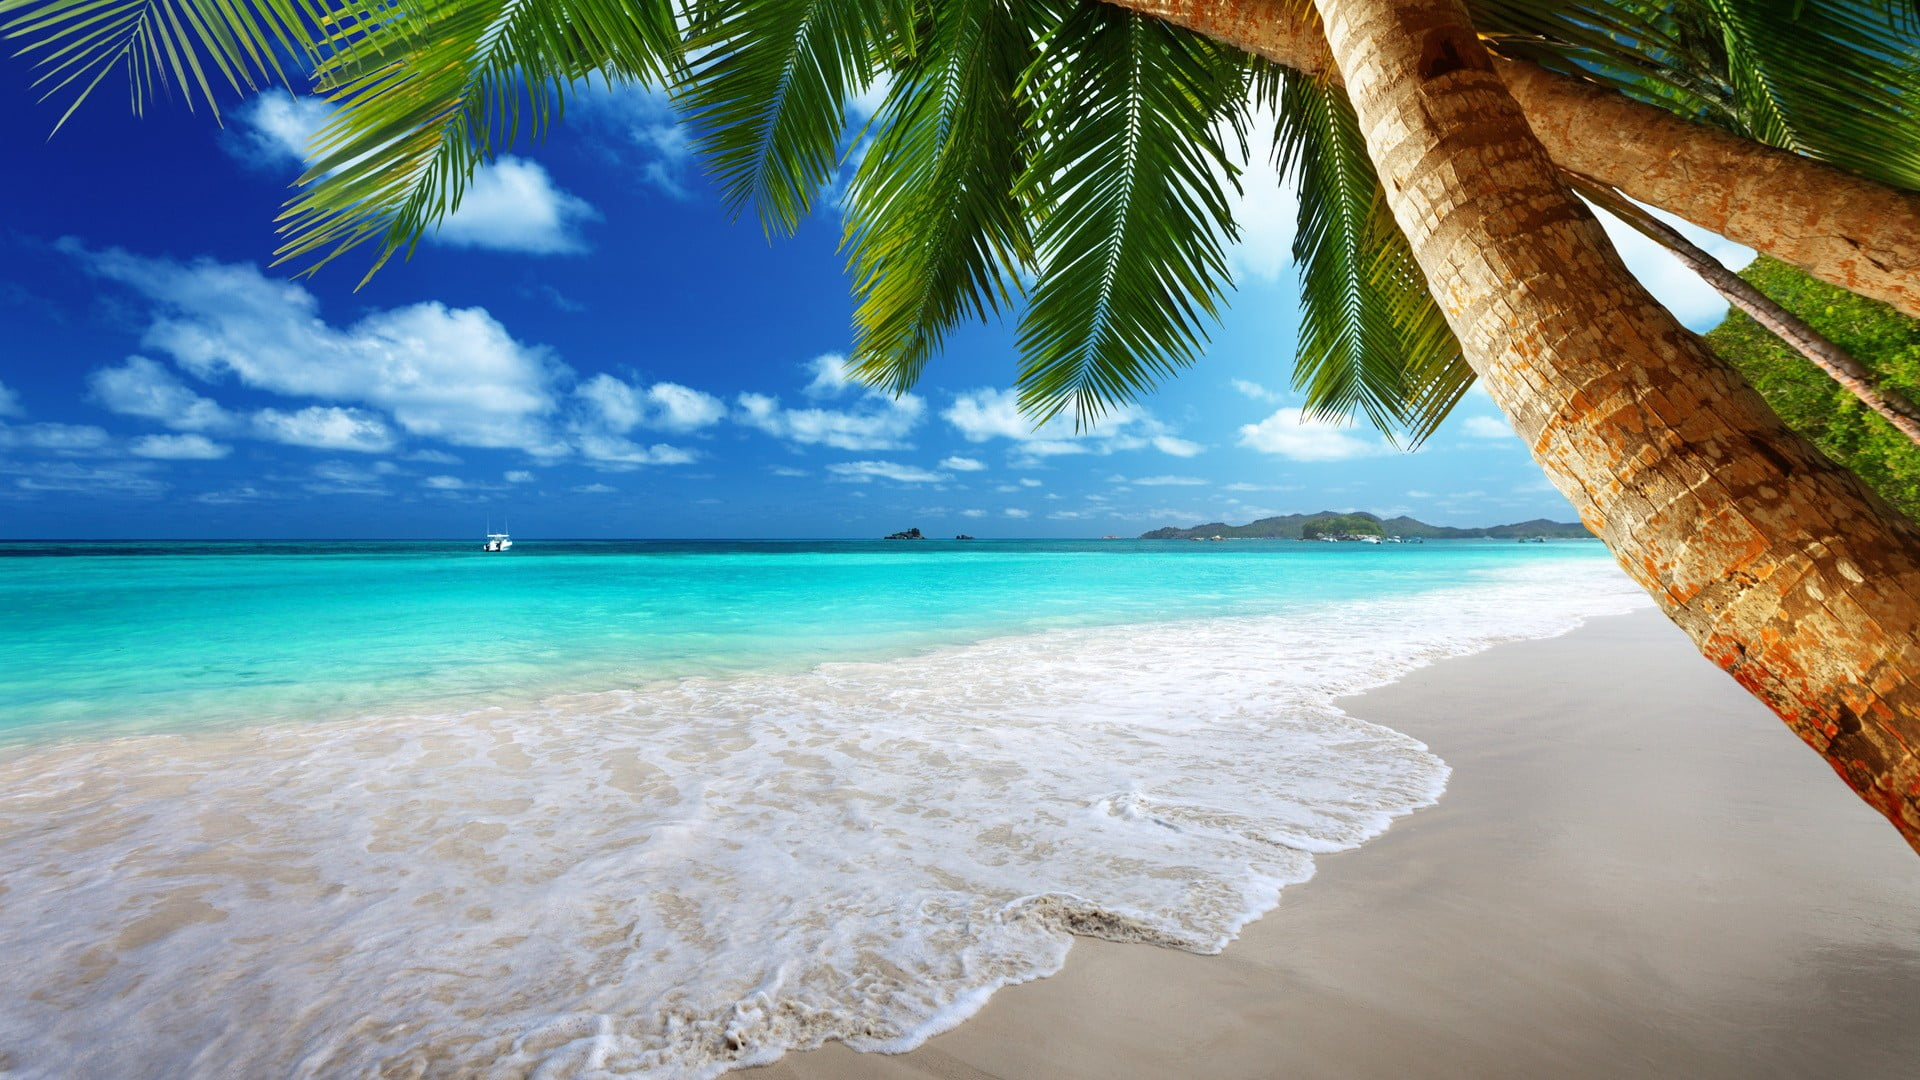 Sea waves and green coconut trees, beach, palm trees, tropical wallpaper